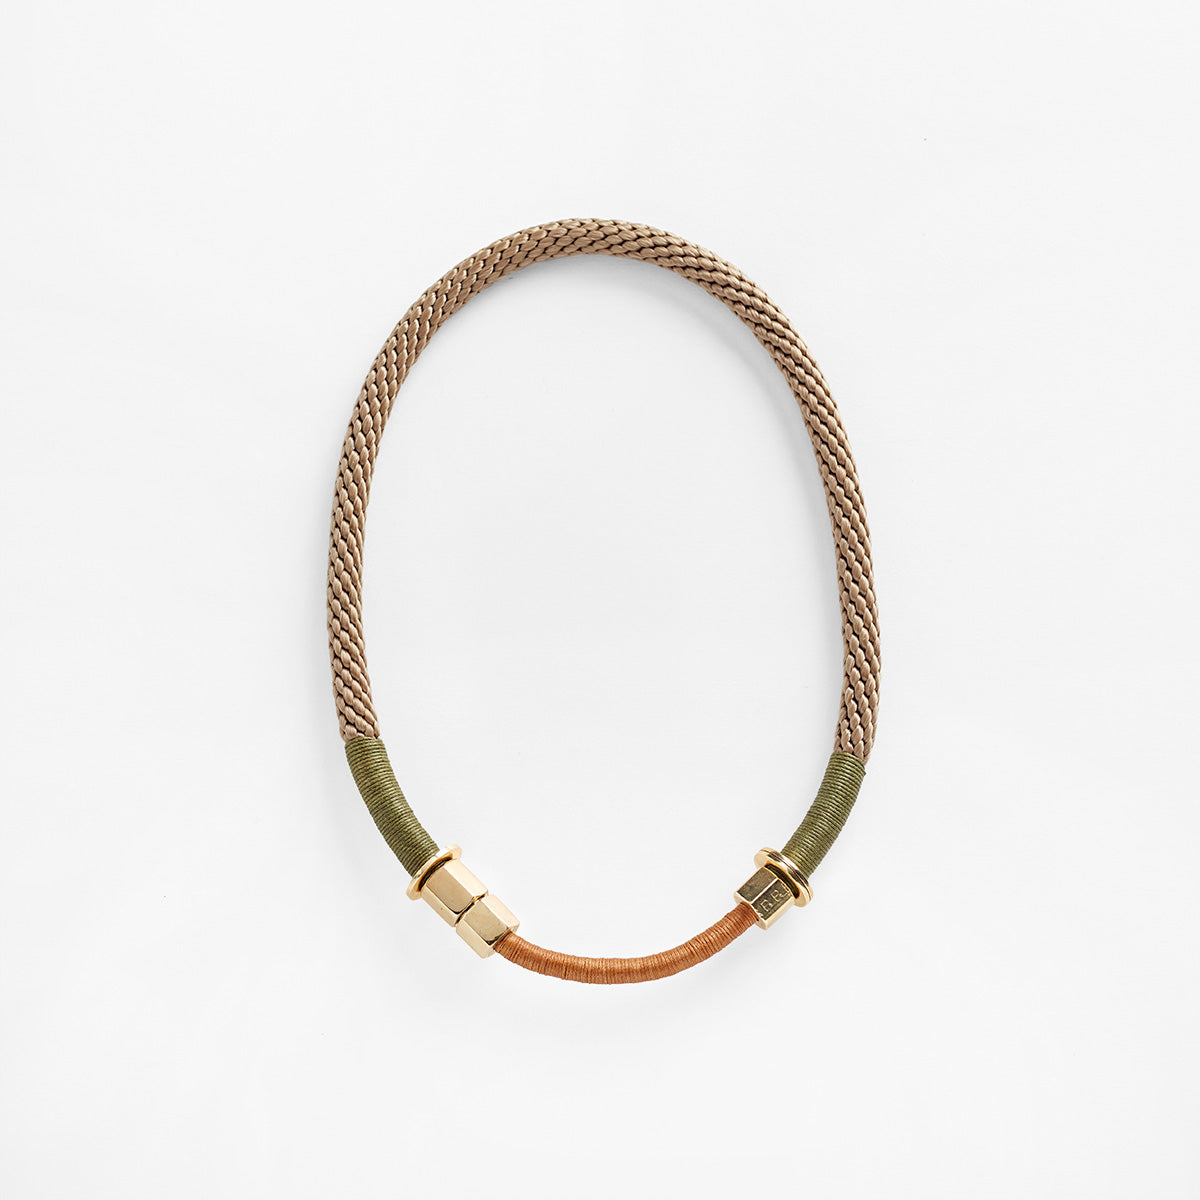 Pichulik | Laetitia Necklace Brass and Rope